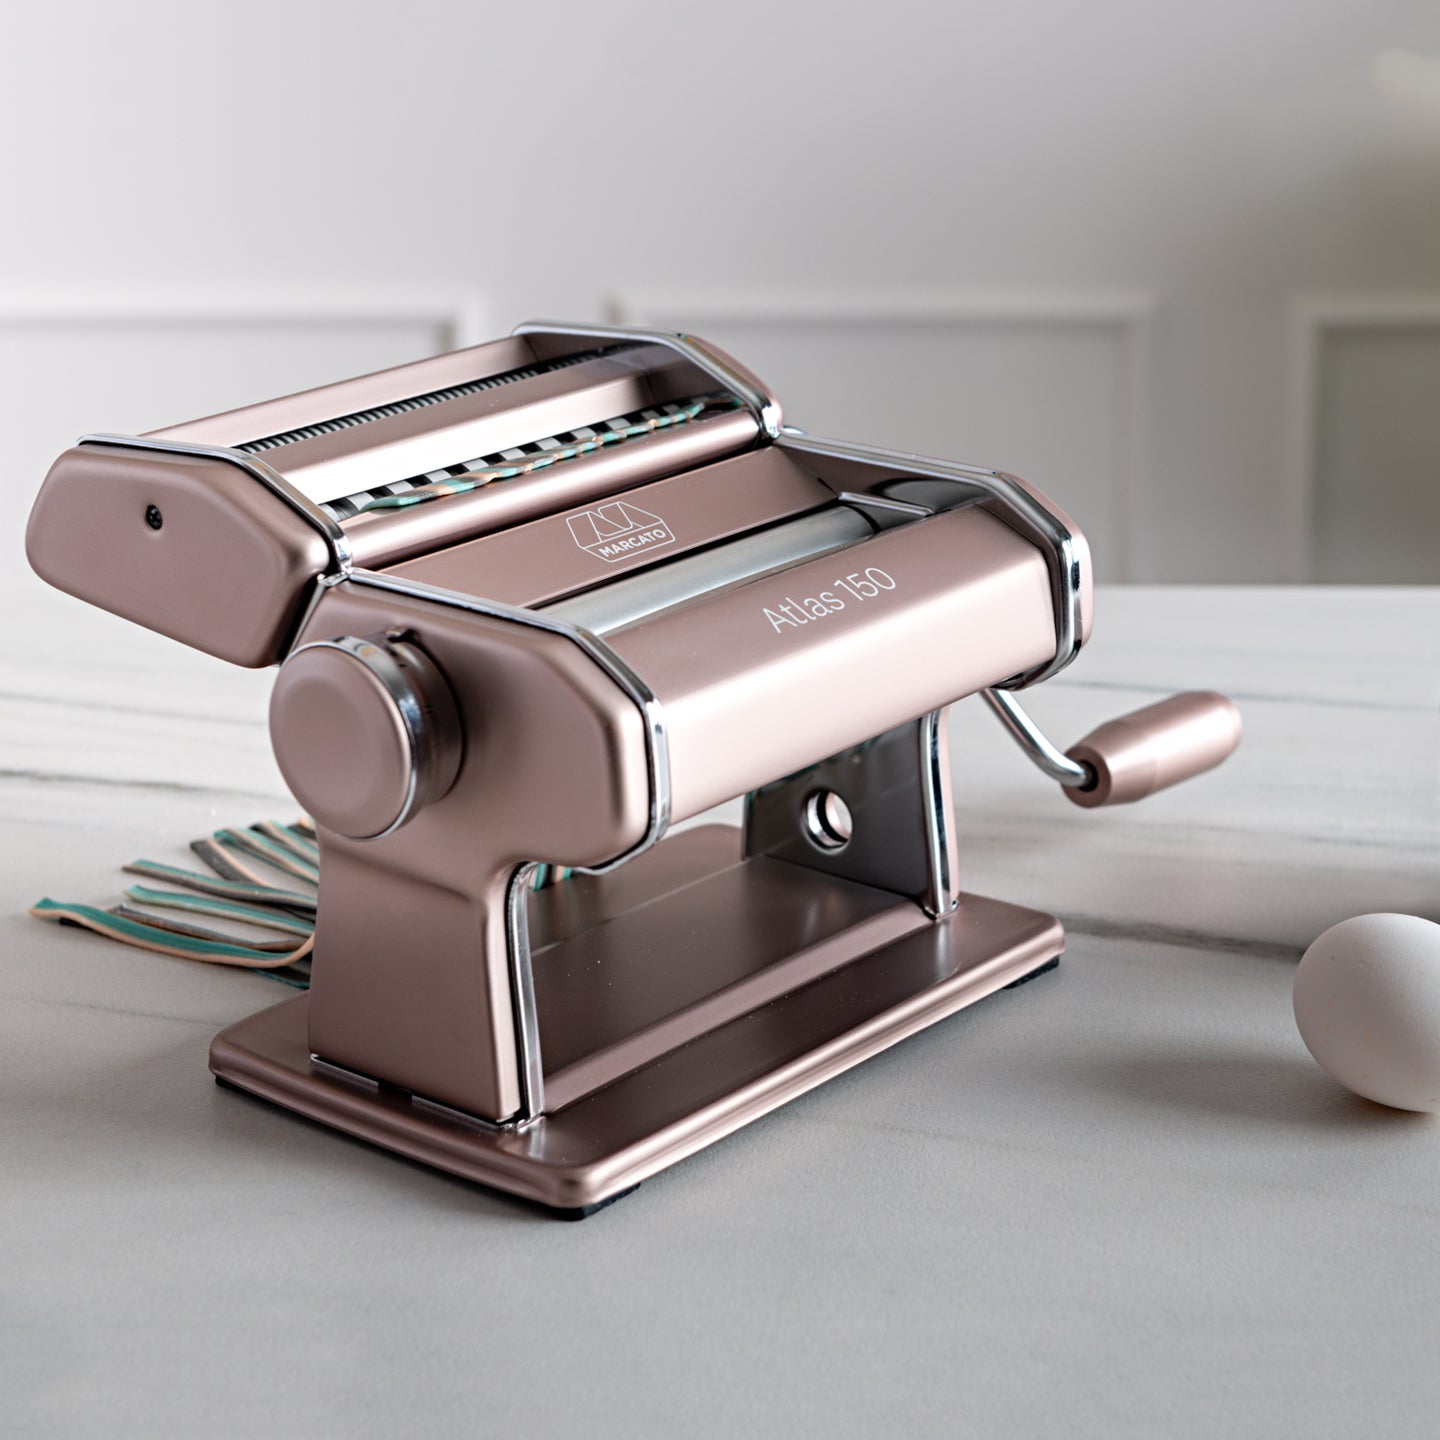 Marcato Atlas 150 Countertop Pasta Machine From Italy: Review